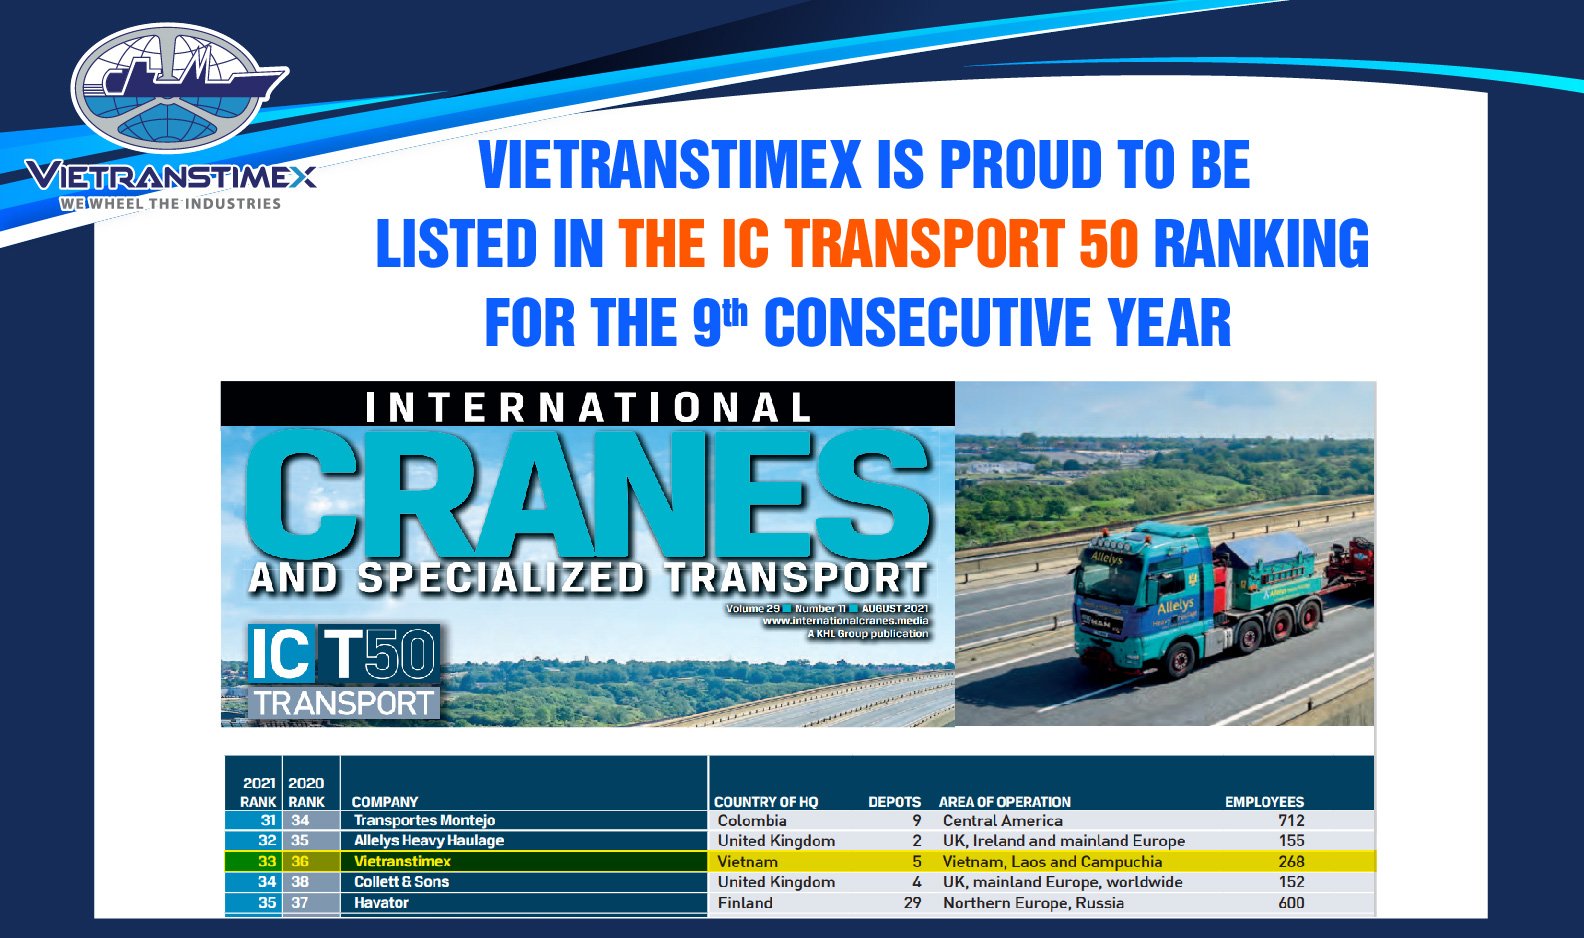 Vietranstimex Is Proud To Be Listed In The IC Transport 50 Ranking For The 9th Consecutive Year